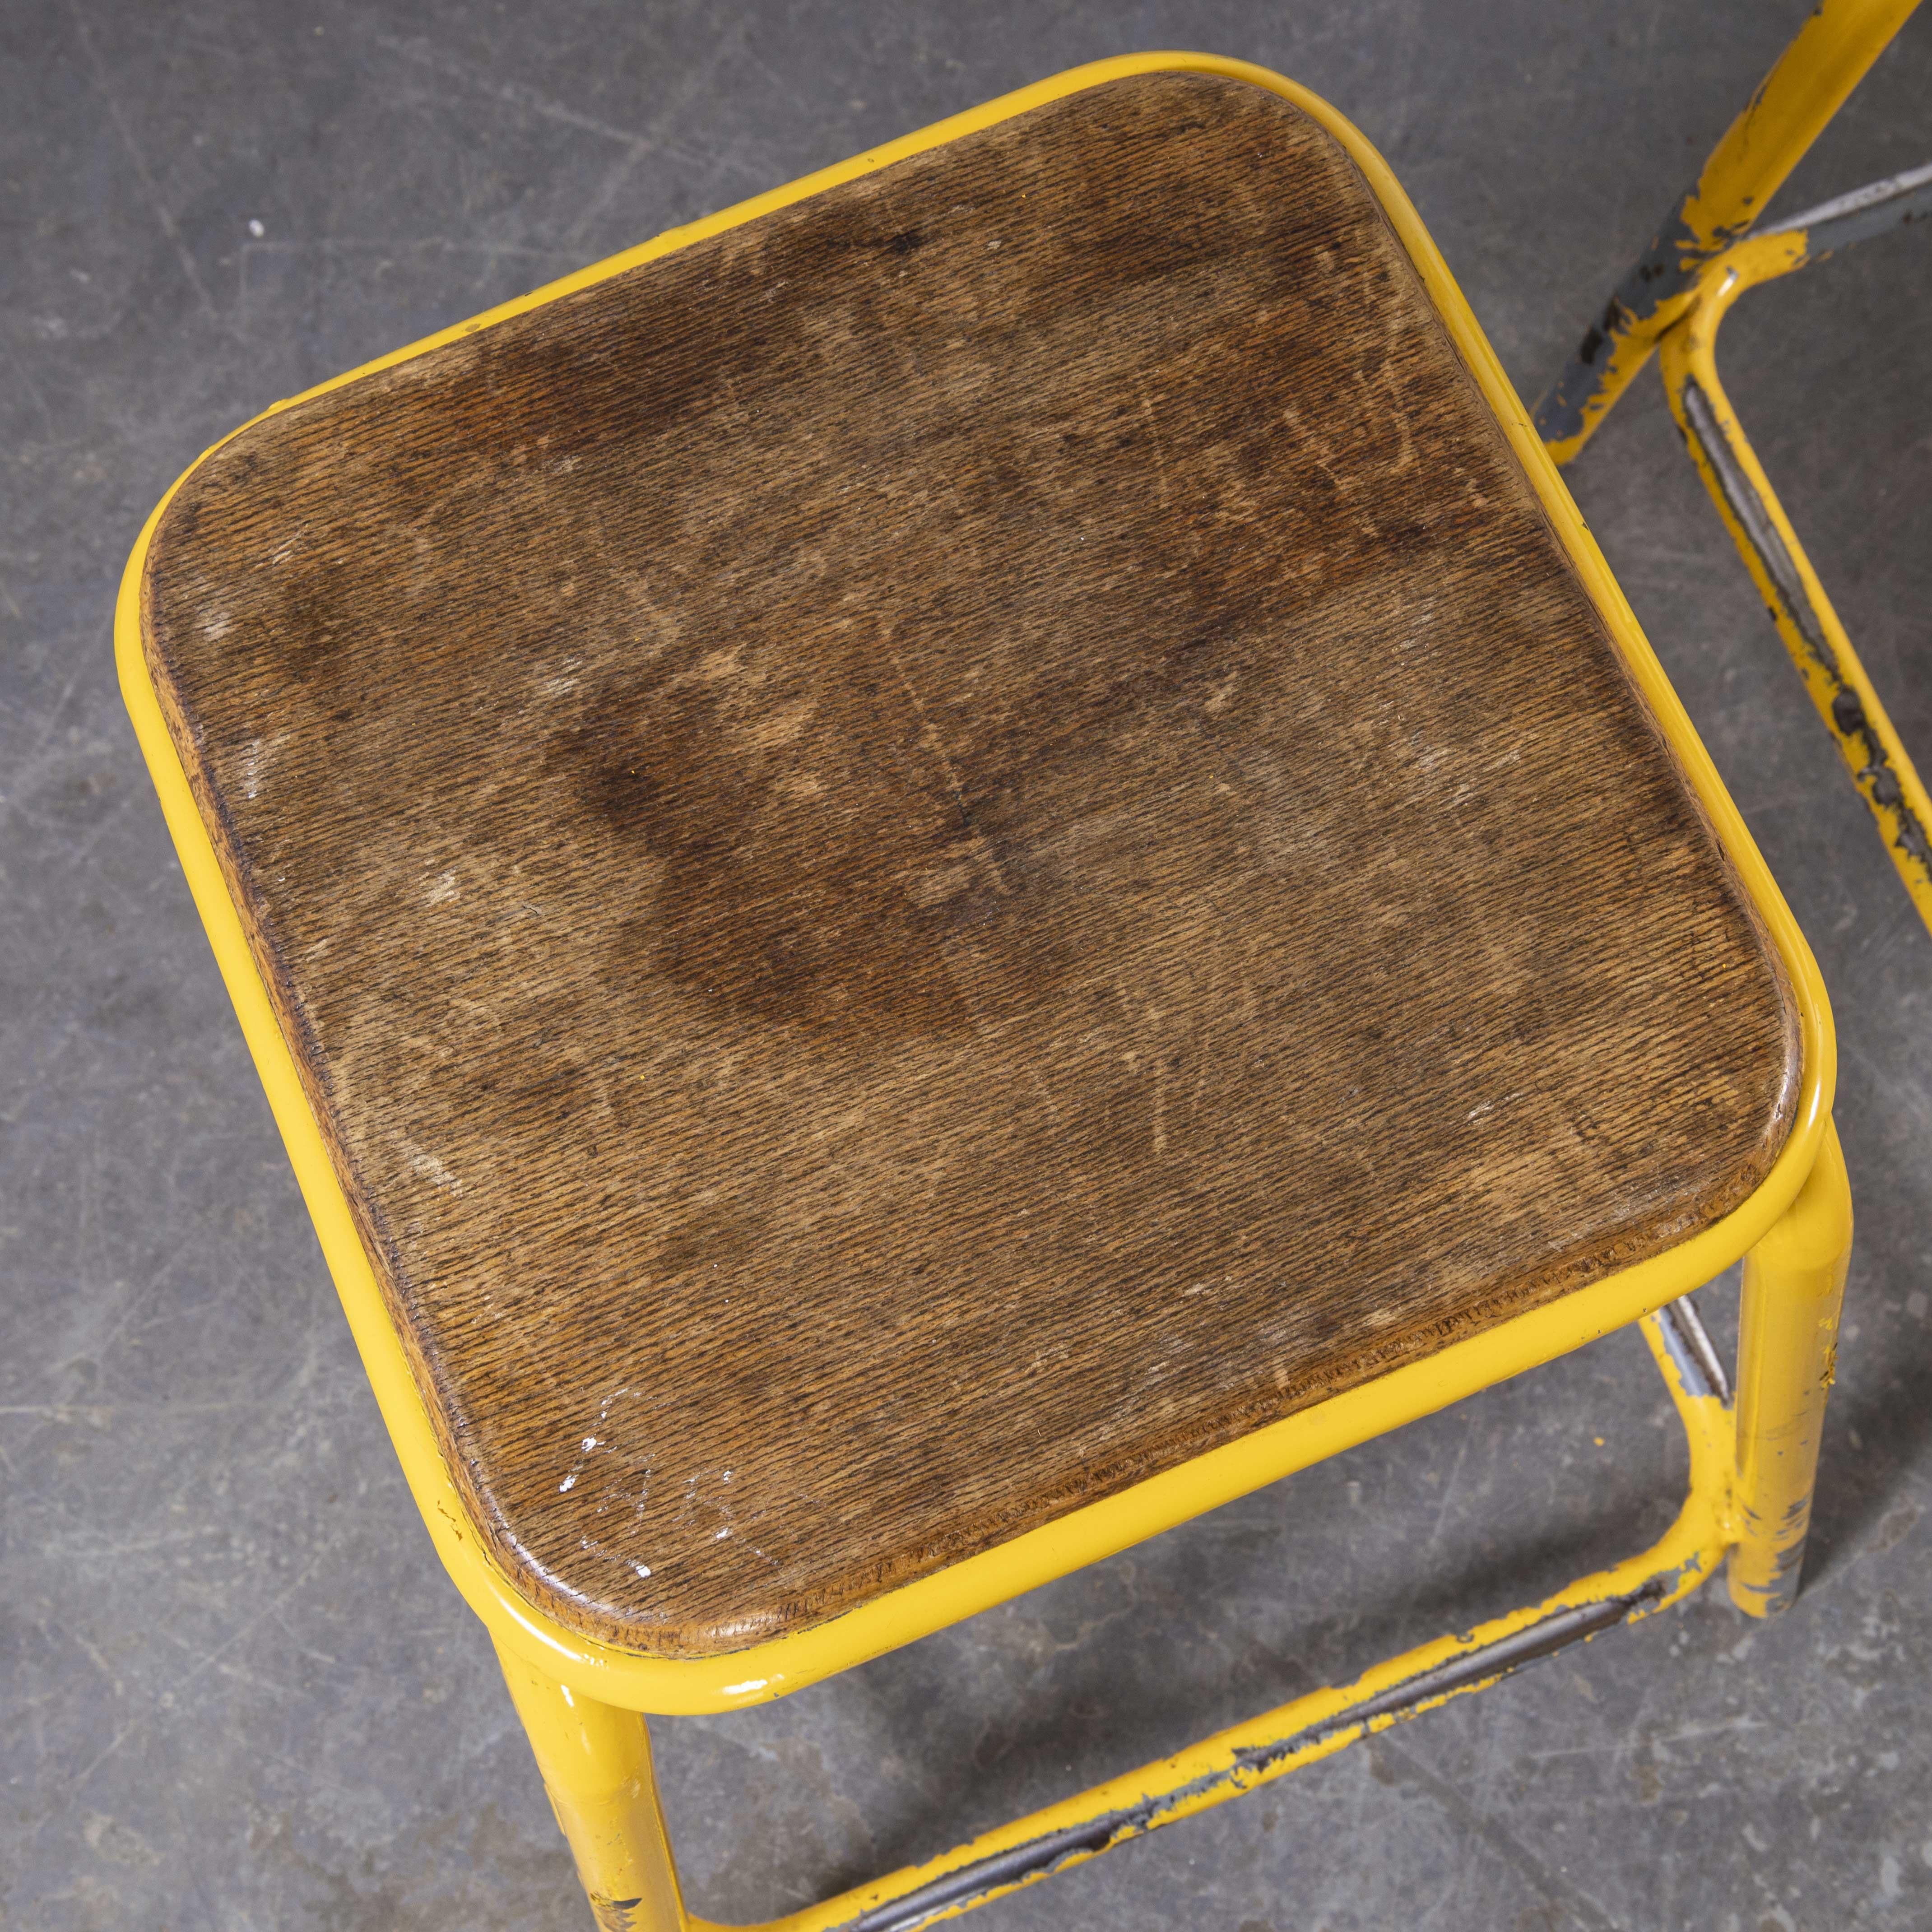 1950’s Mullca industrial French stacking high stools – set of four
1950?s Mullca industrial French stacking high stools – set of four. We are huge fans of the French company Mullca and these wonderful stools in wonderful aged condition, are getting